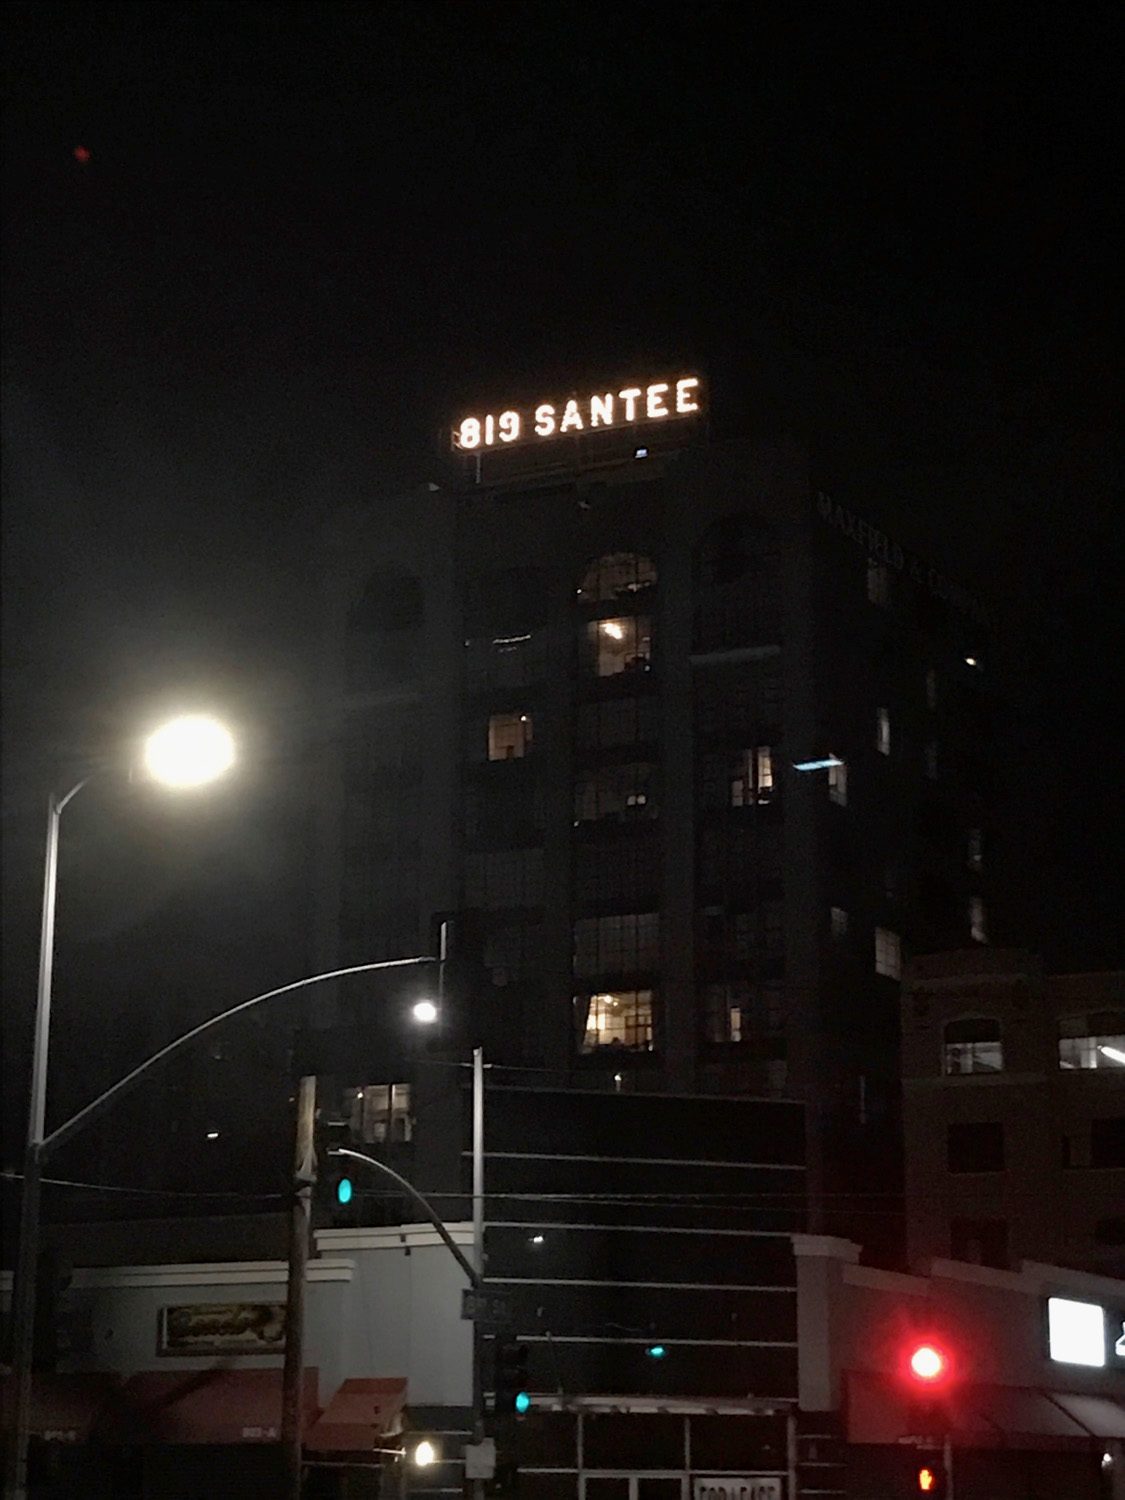 Rooftop sign after rehabilitation, at night.